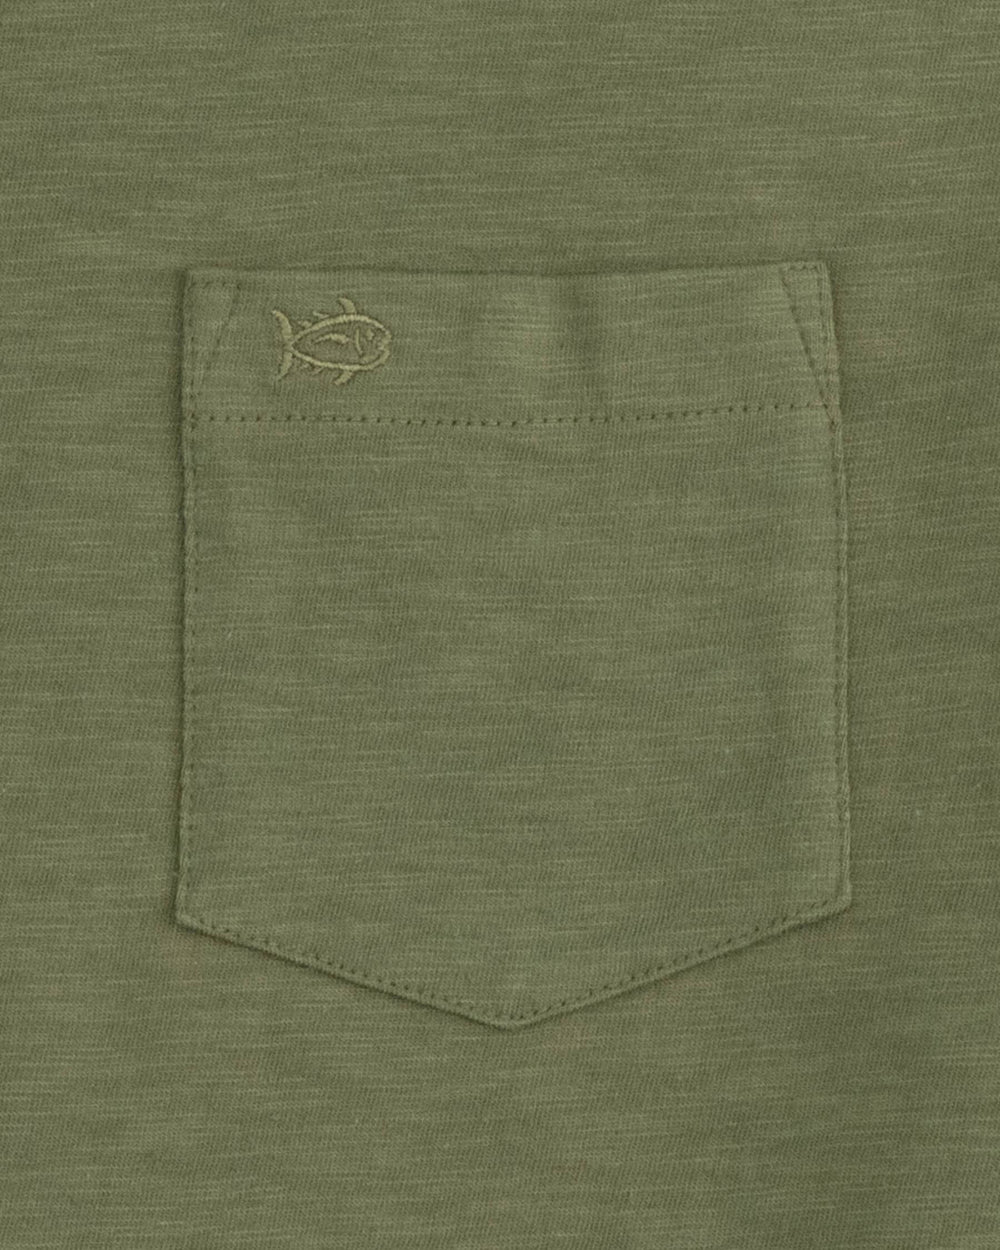 The pocket view of the Sun Farer T-Shirt by Southern Tide - Pine